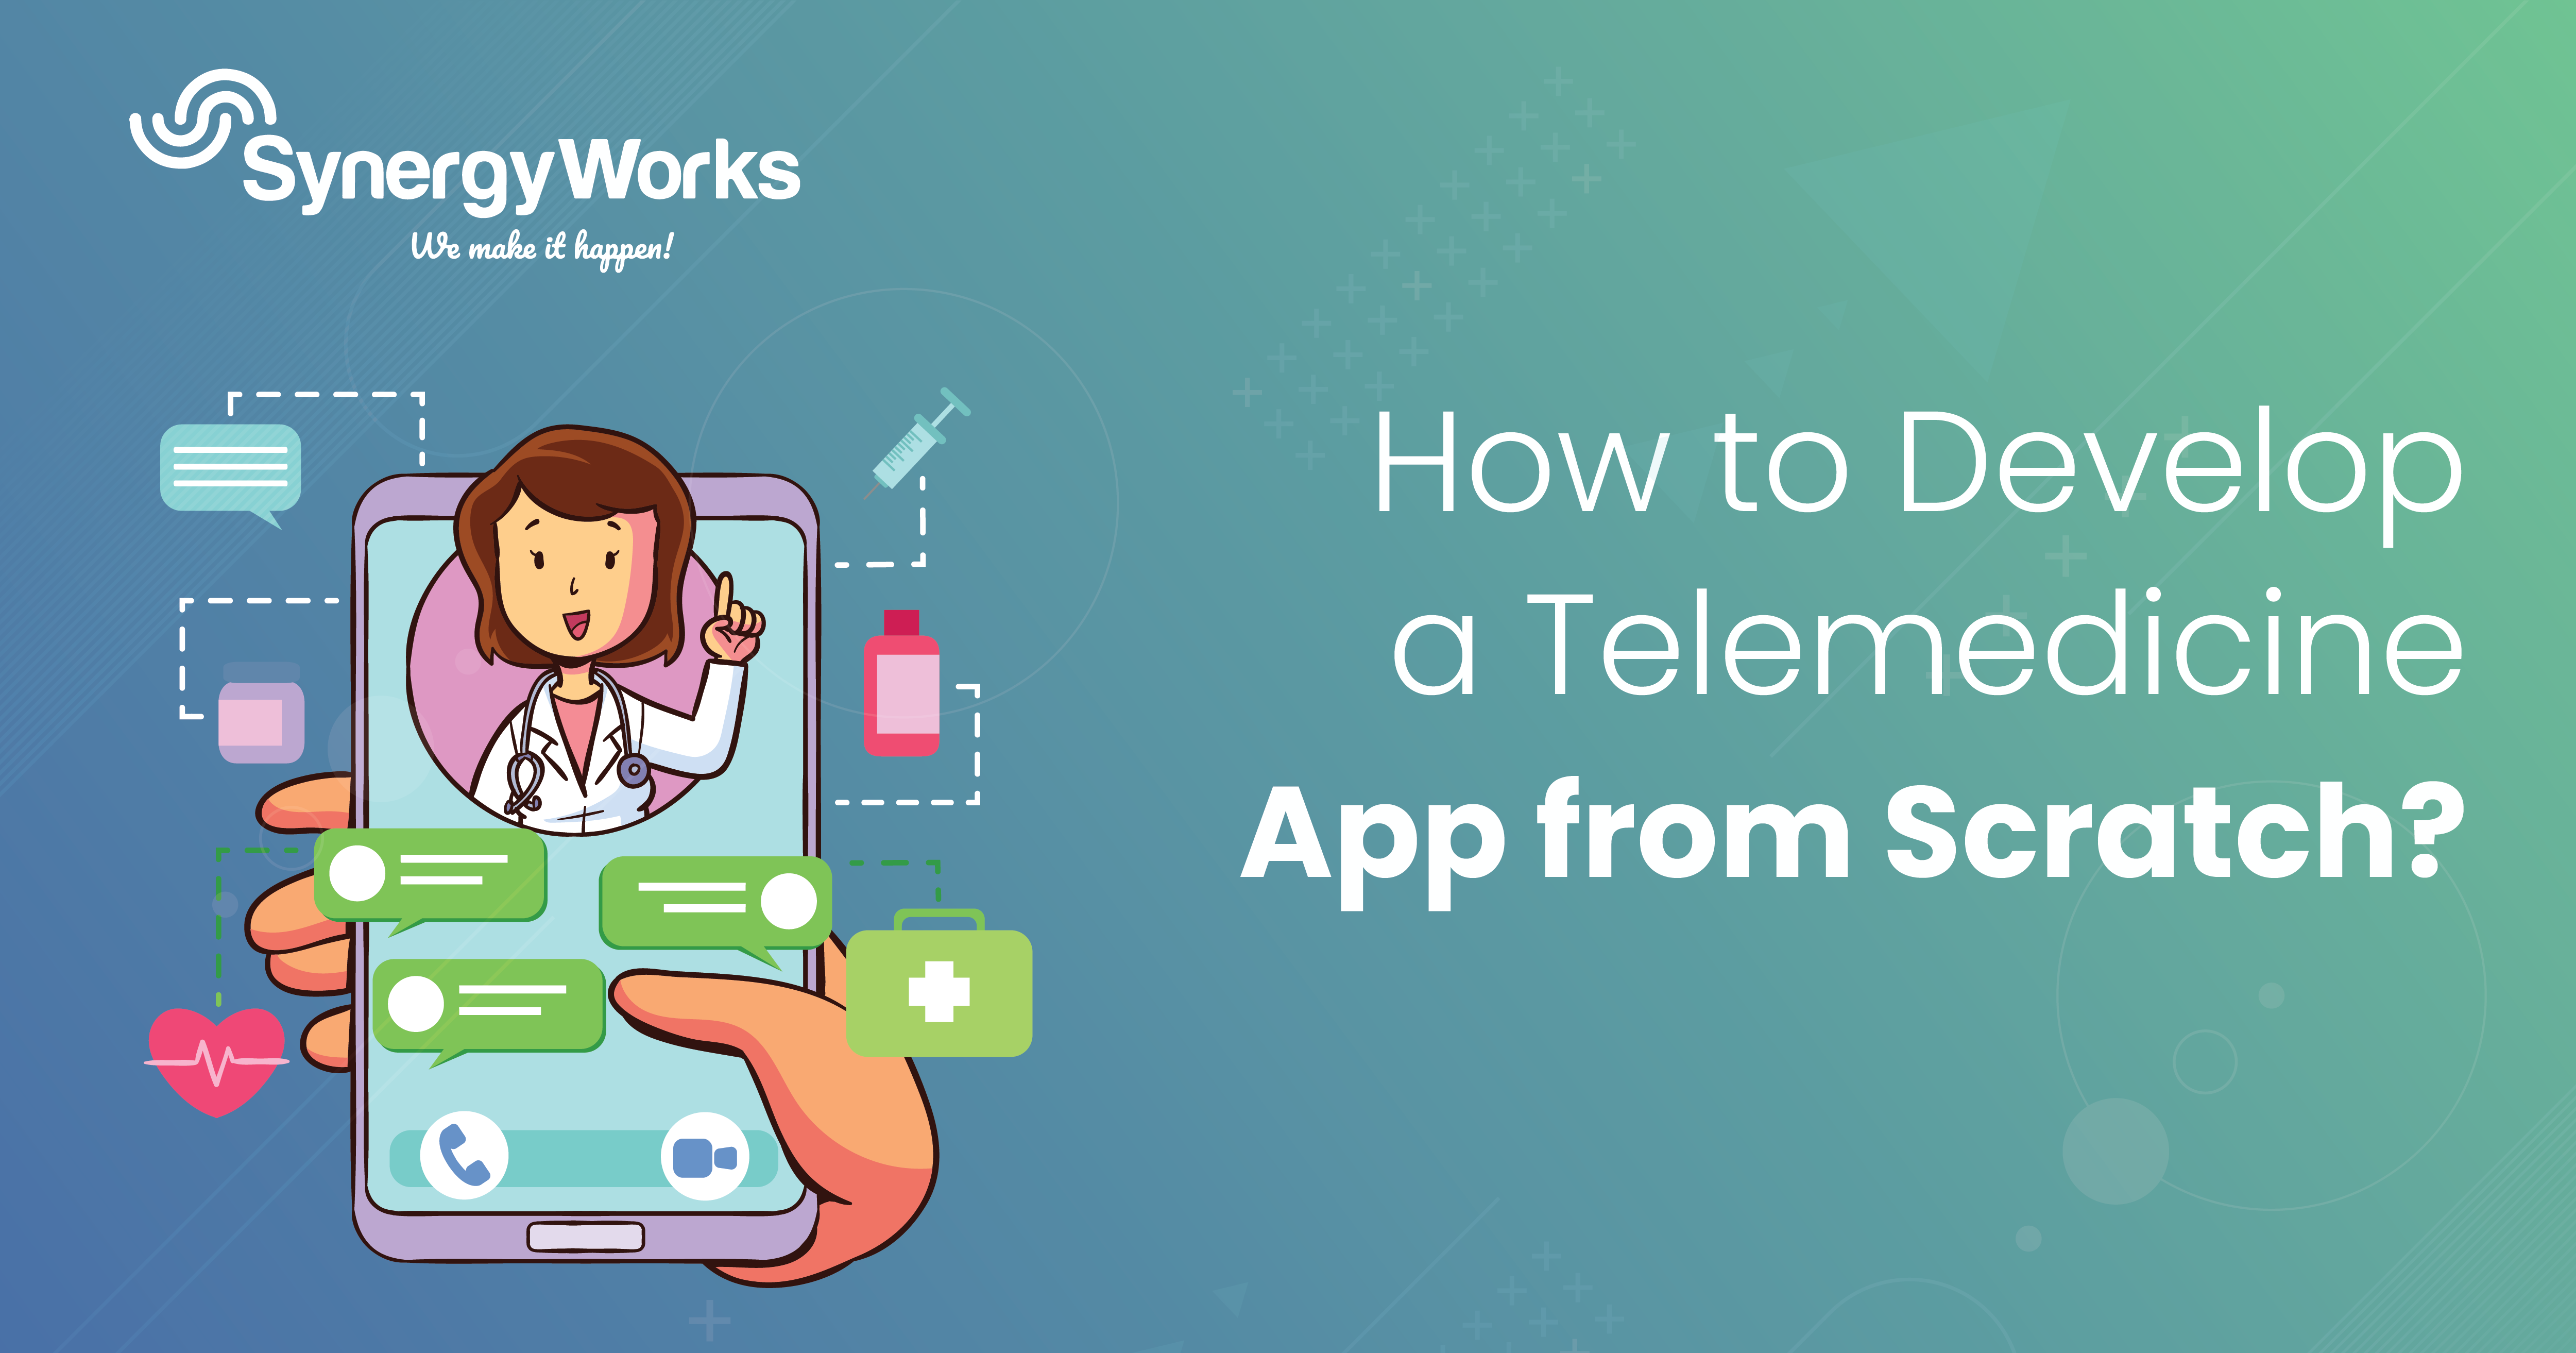 How to Develop a Telemedicine App From Scratch?